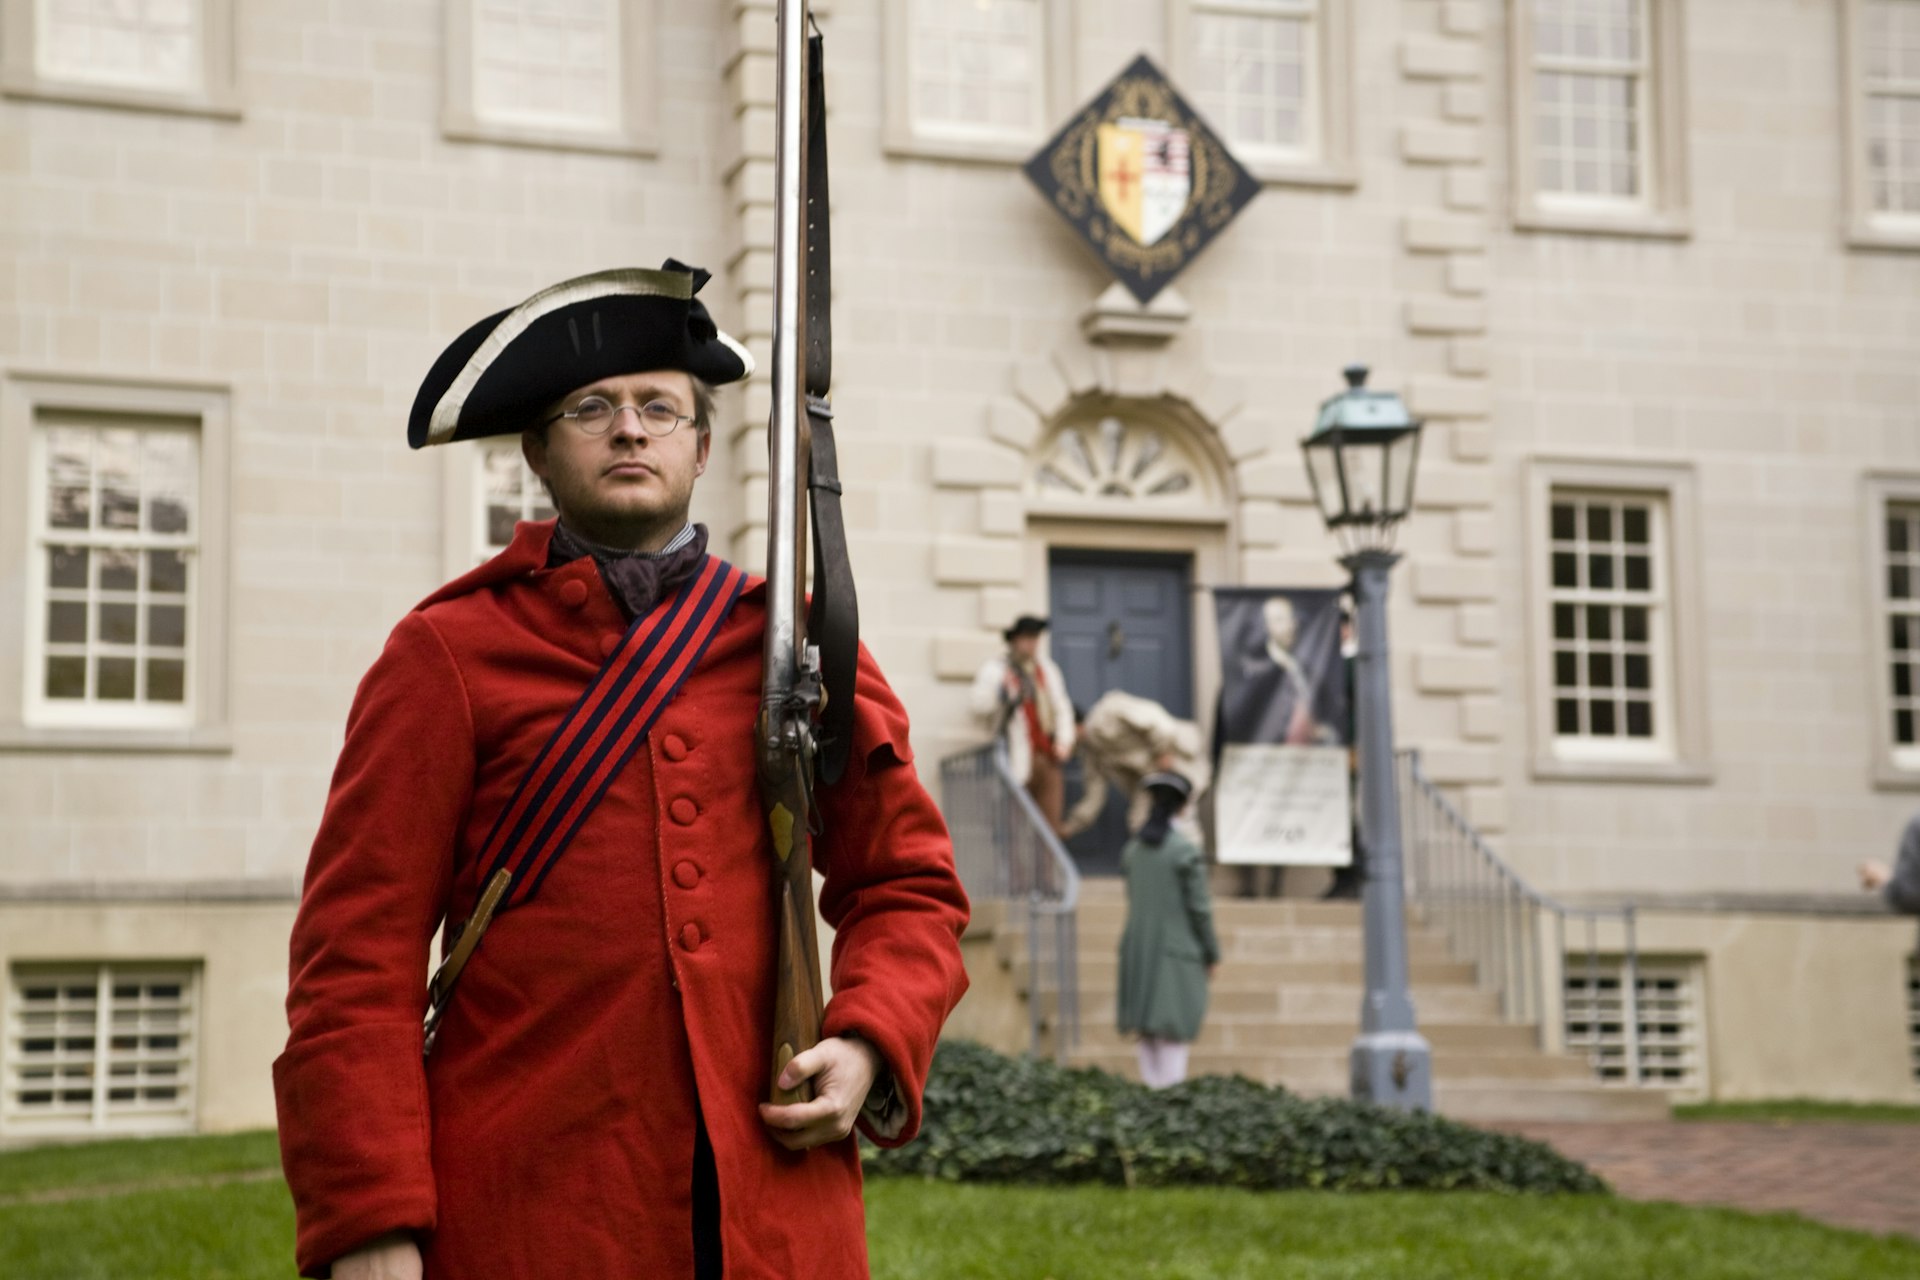 An actor dressed as a Revolutionary War soldier in a red coat and bicorne hat at Carlyle House, Alexandria, Virginia, USA